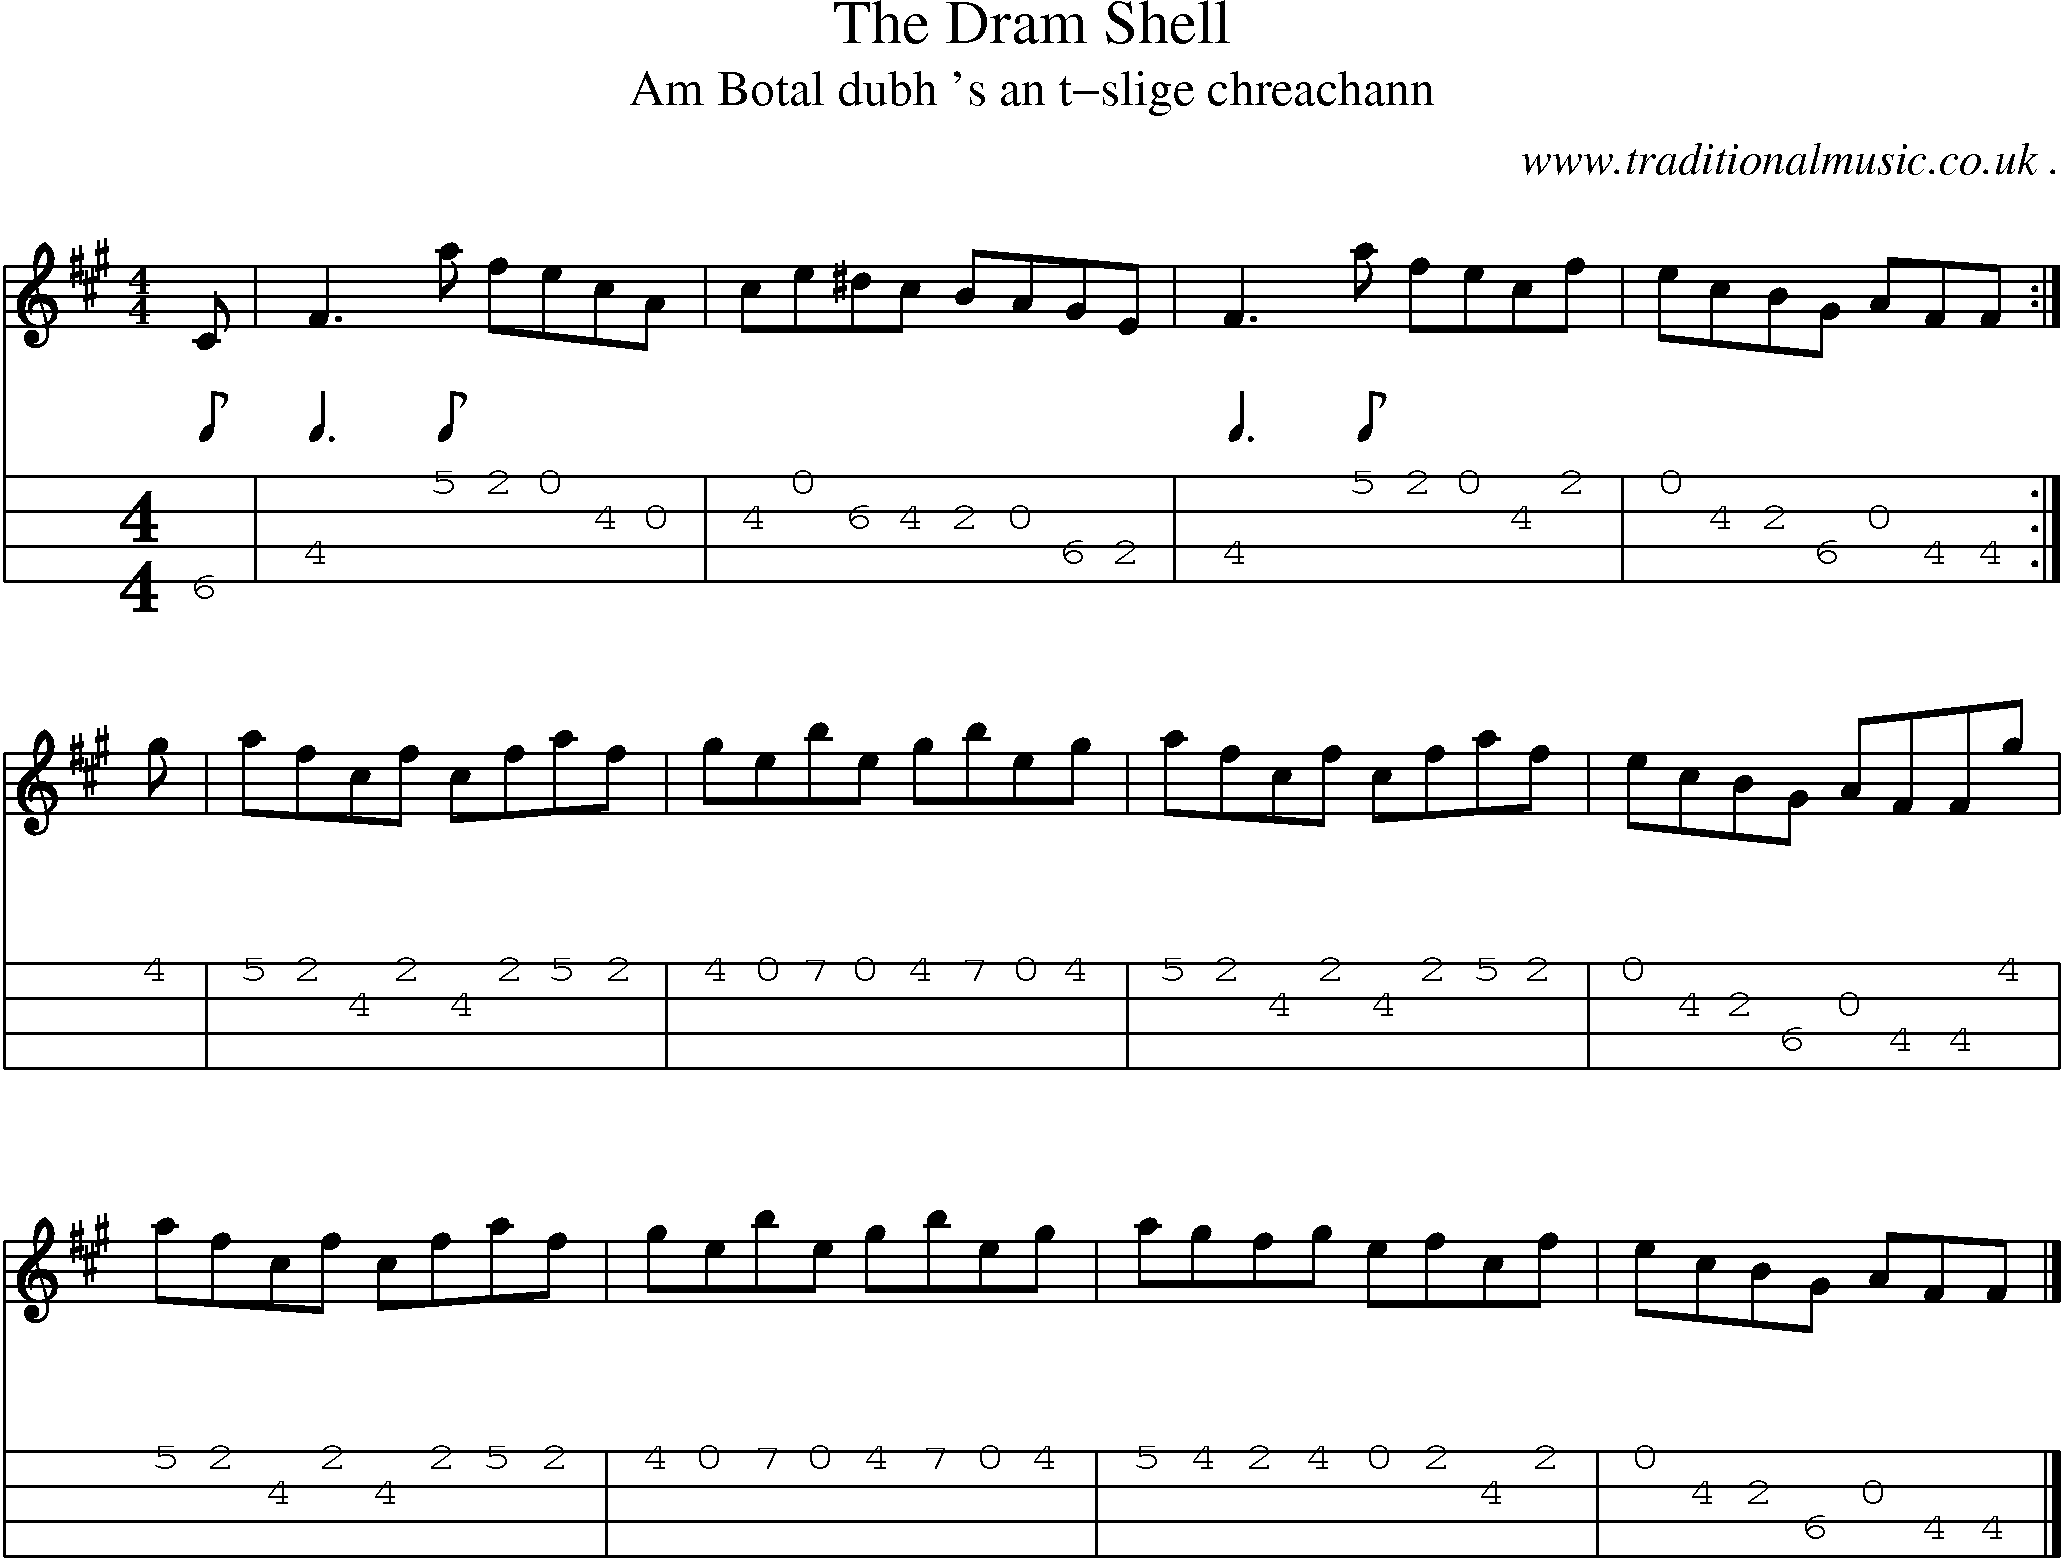 Sheet-music  score, Chords and Mandolin Tabs for The Dram Shell